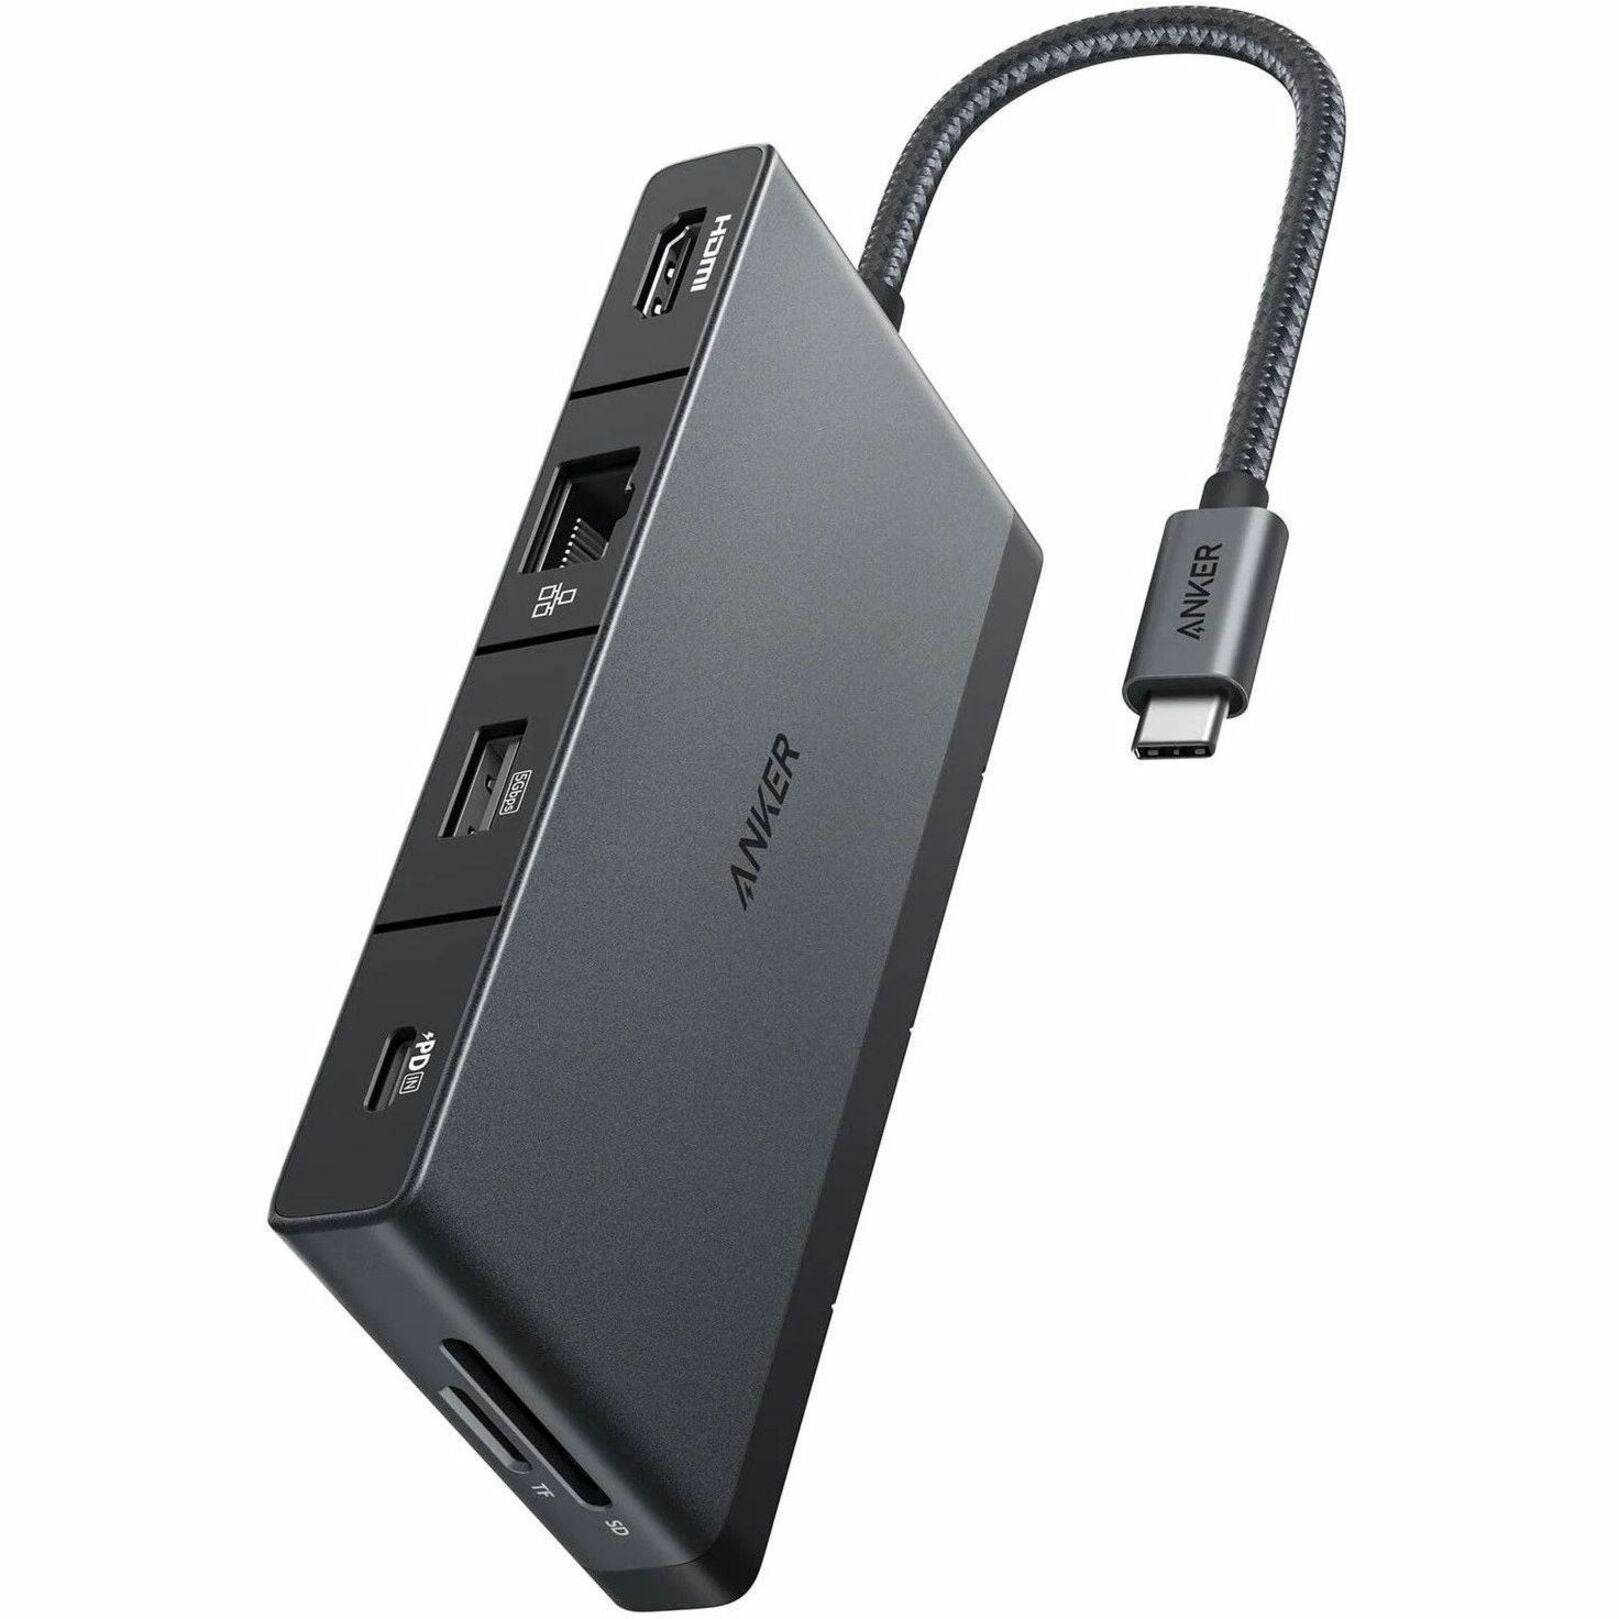 ANKER A8373H11 552 USB-C Hub (9-in-1, 4K HDMI), Power Delivery Pass-through, Gigabit Ethernet, Black